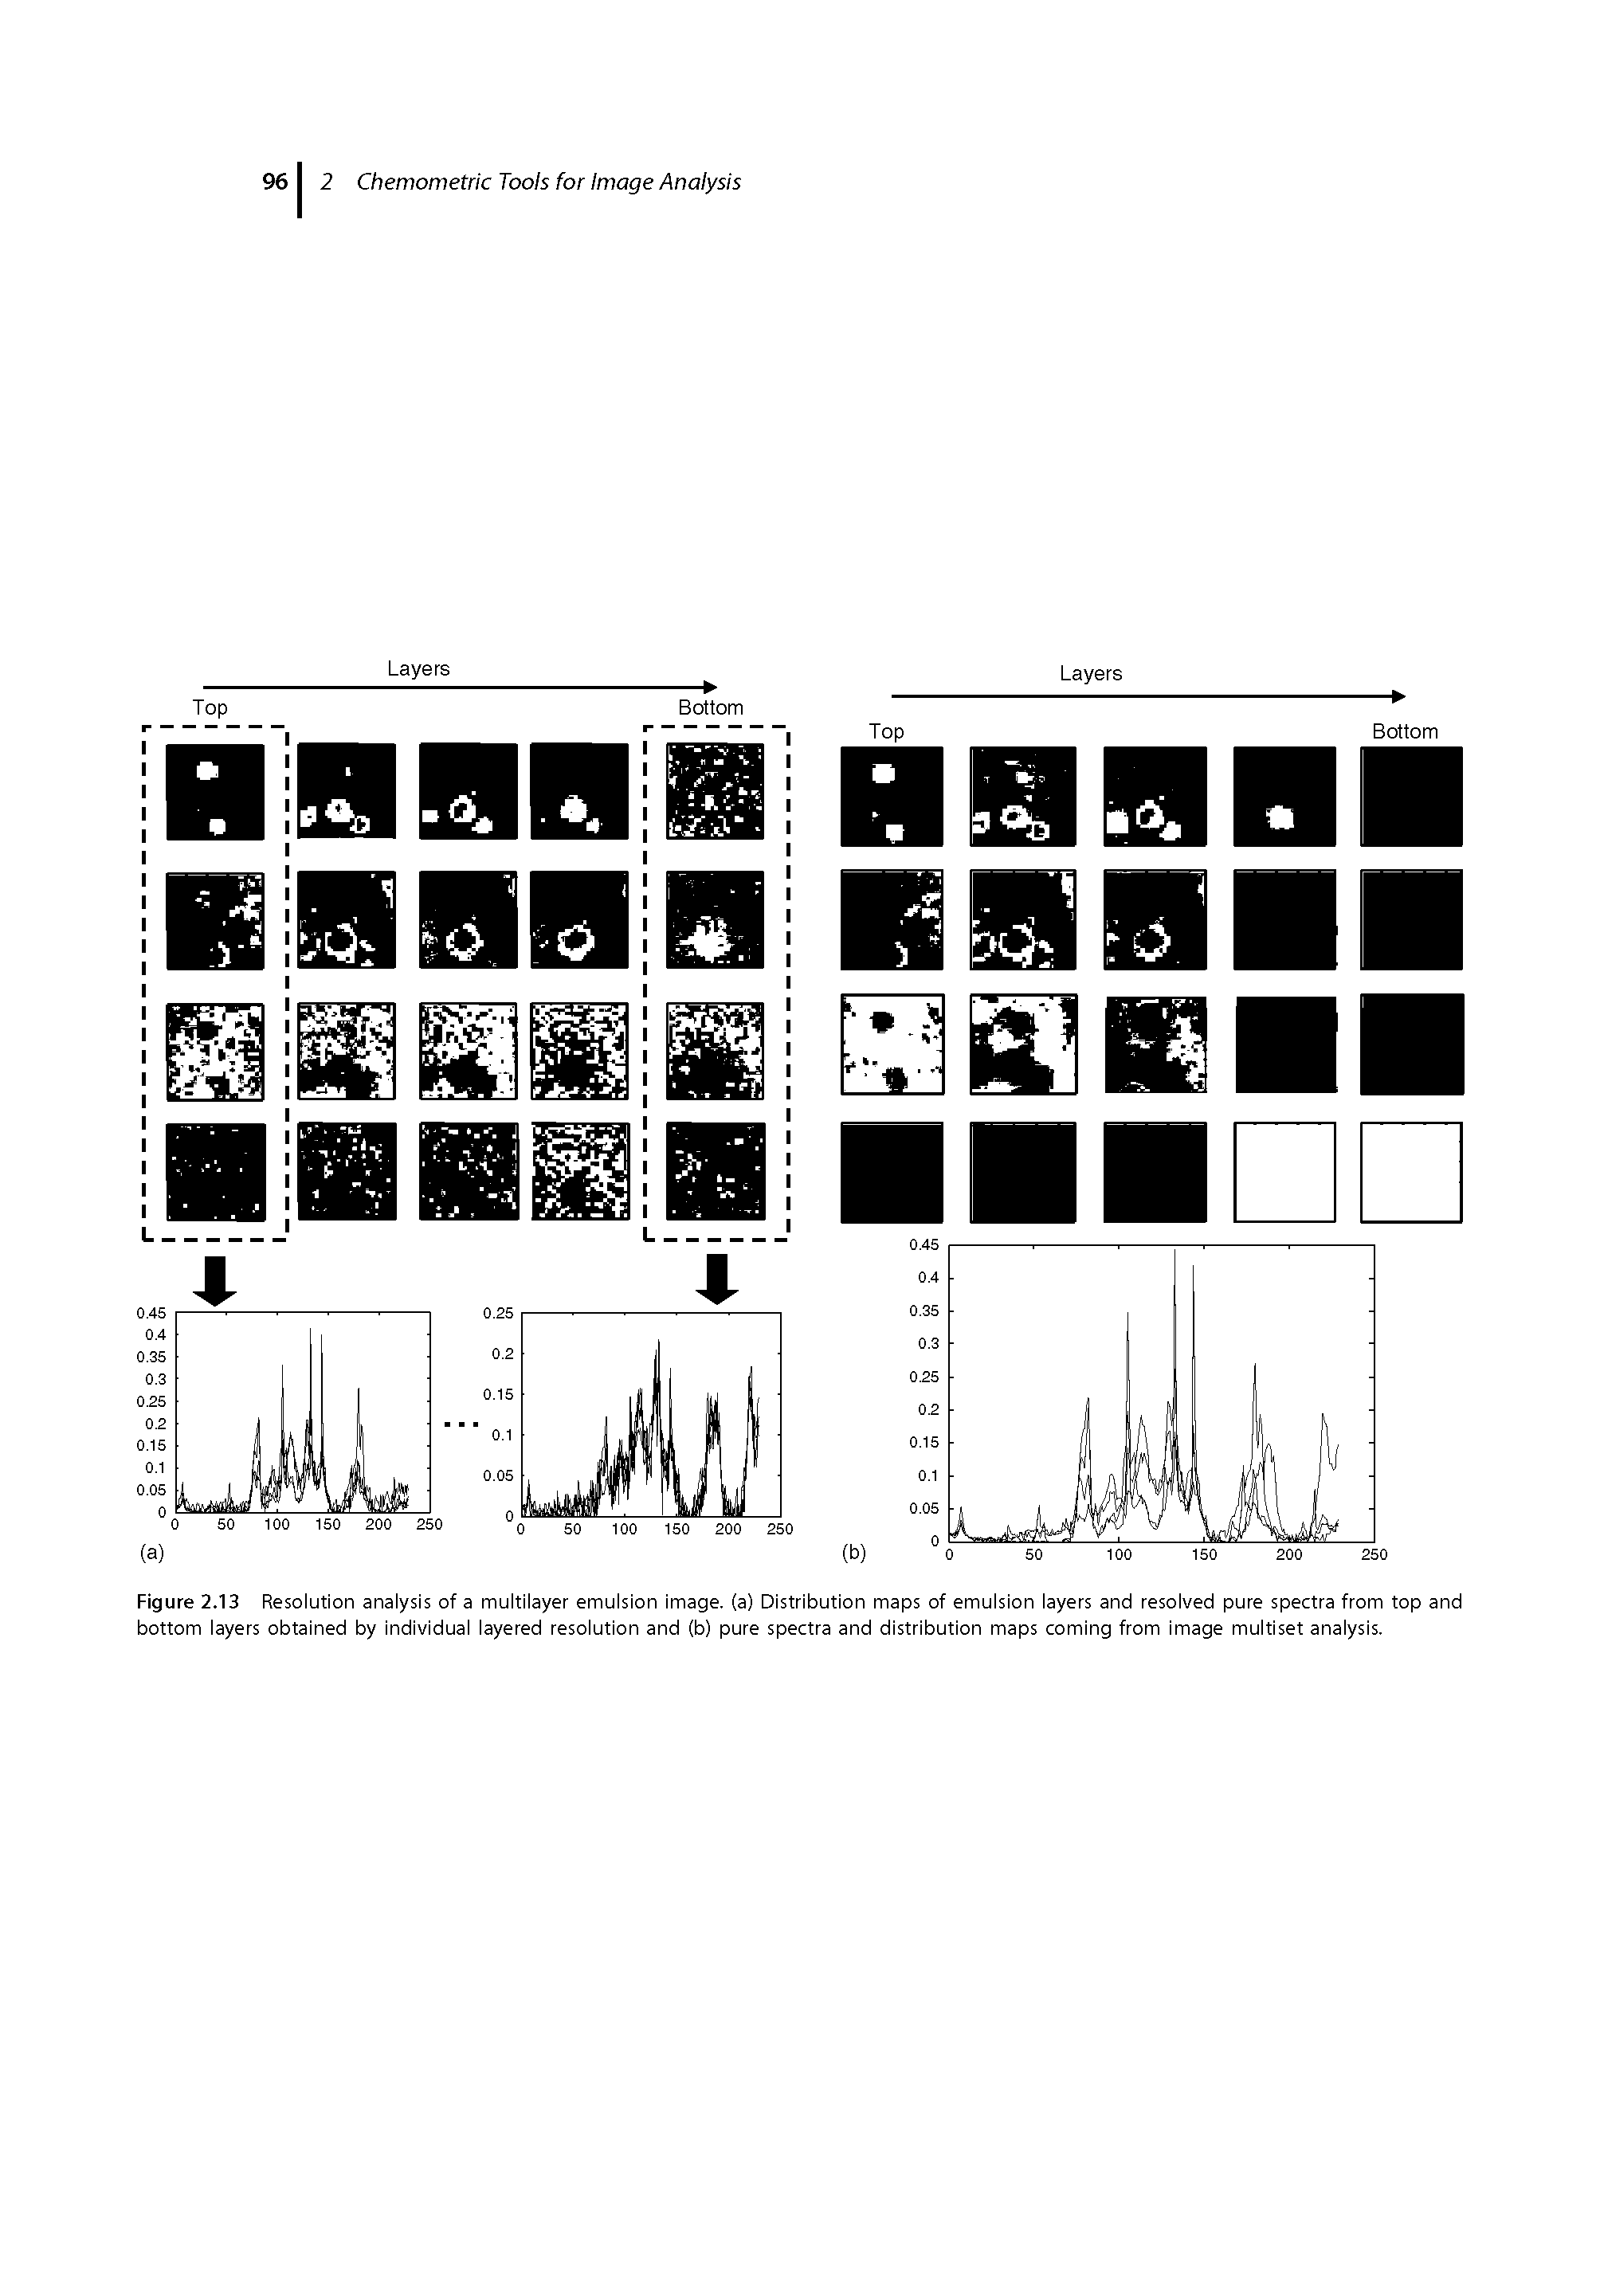 Figure 2.13 Resolution analysis of a multilayer emulsion image, (a) Distribution maps of emulsion layers and resolved pure spectra from top and bottom layers obtained by individual layered resolution and (b) pure spectra and distribution maps coming from image multiset analysis.